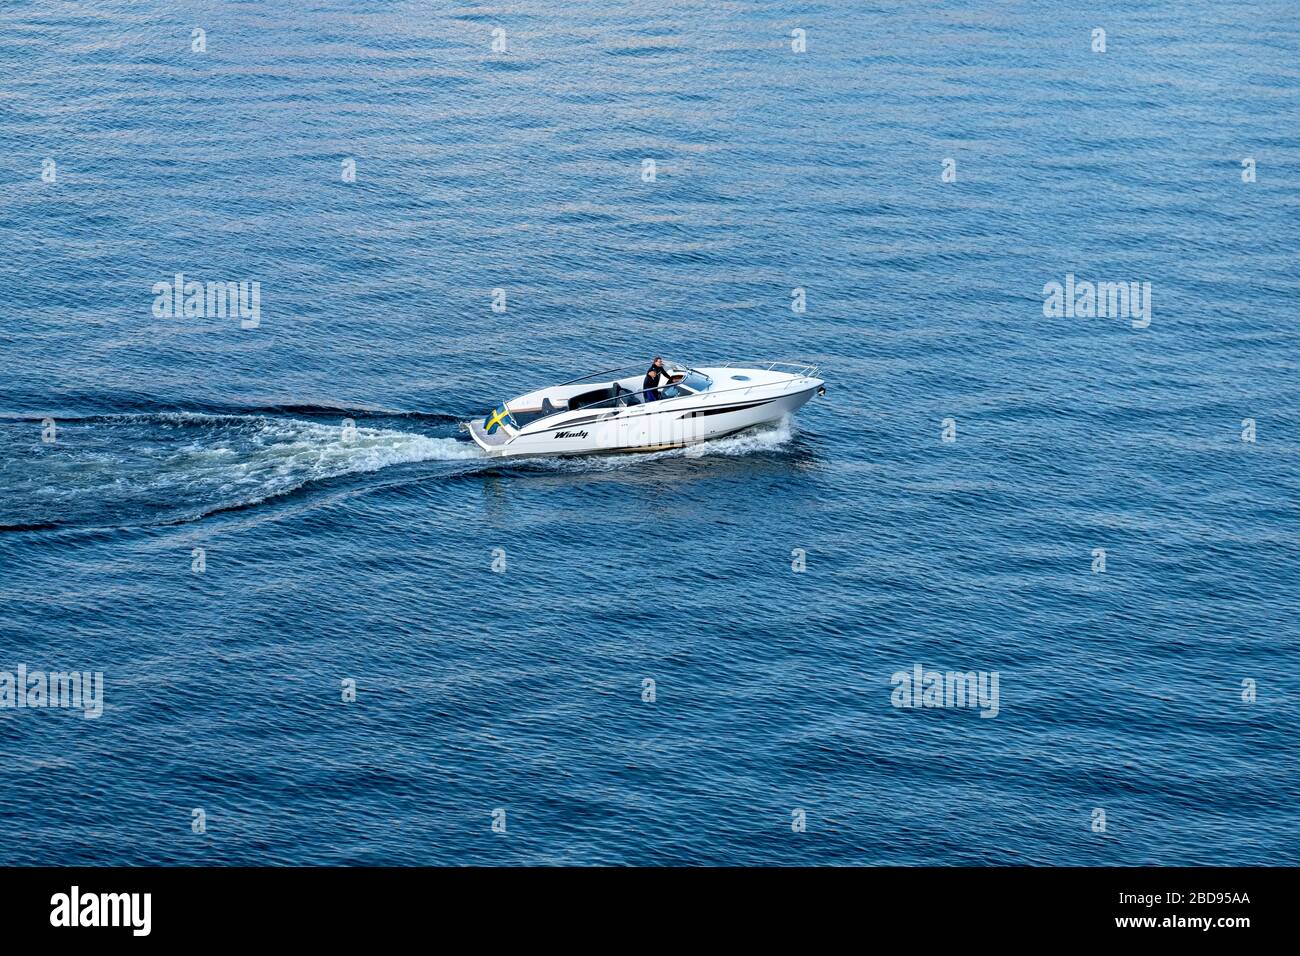 Aerial view of a speed boat Stock Photo